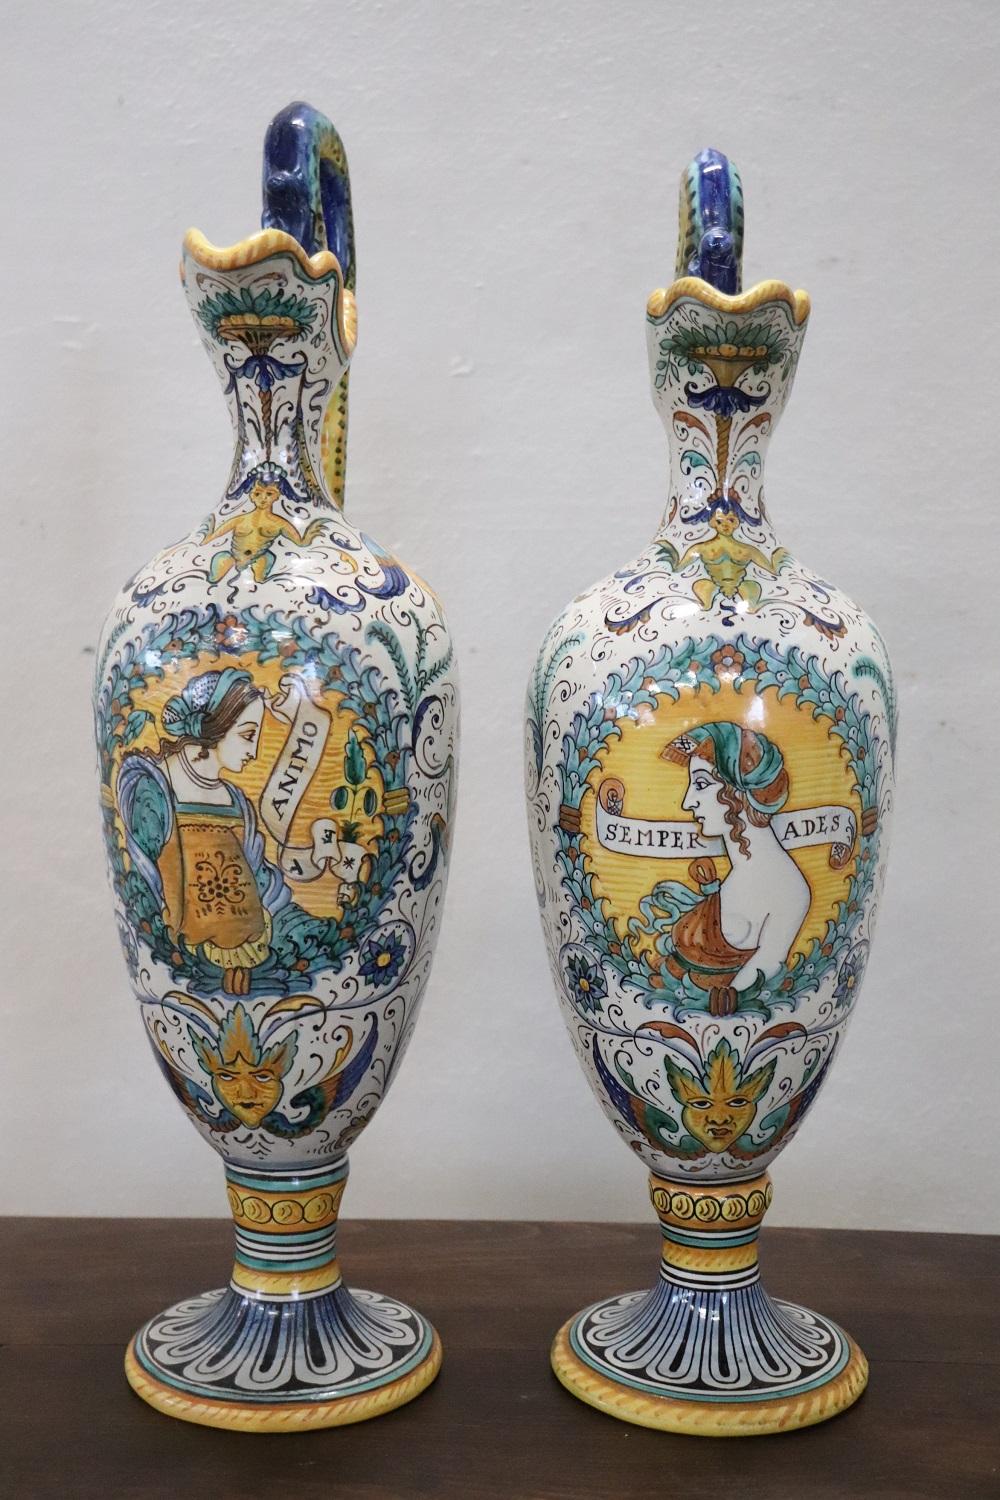 Early 20th century elegant pair of Italian-made Deruta amphorae, branded at the base. Characterized by a refined hand-painted decoration with Renaissance-inspired motifs. In perfect condition, the height is not exactly the same.